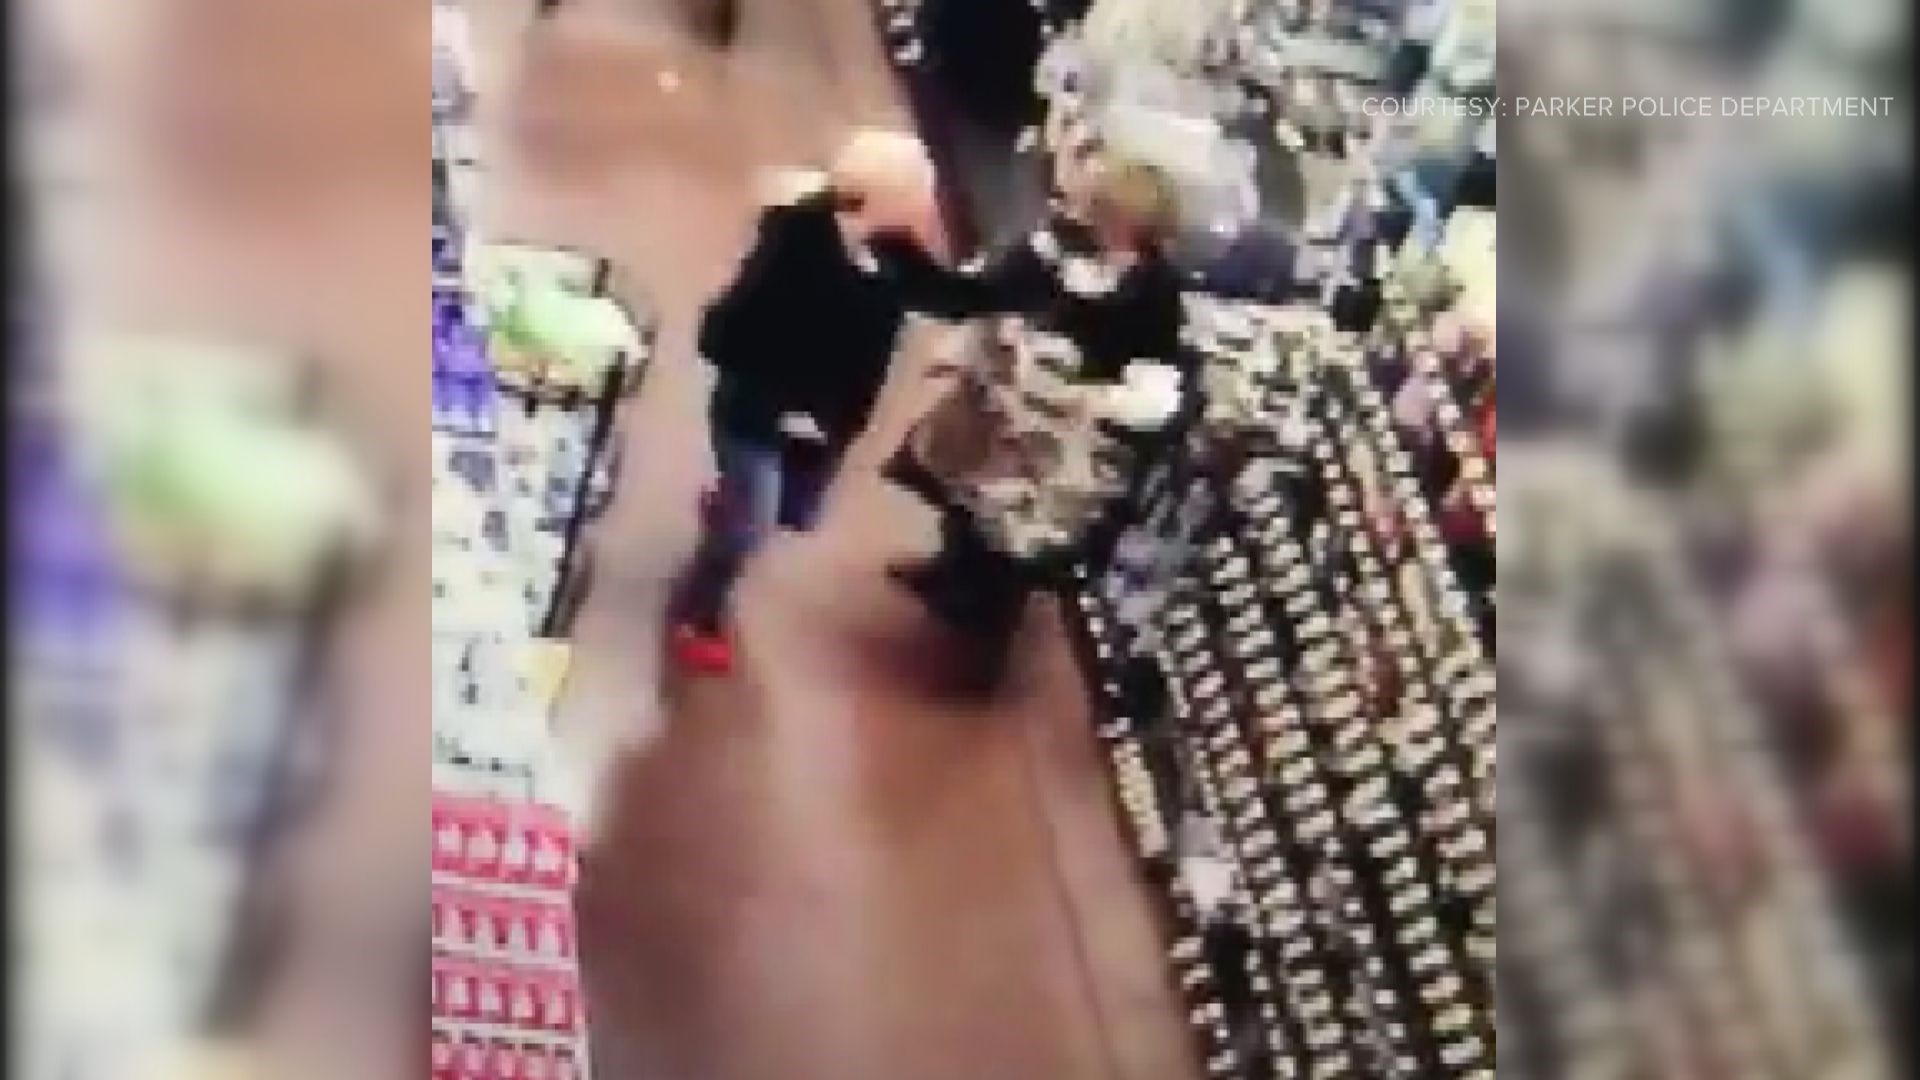 The Park Police Department is working to identify a woman who was captured on video slapping a King Soopers employee who asked her to put on a mask.